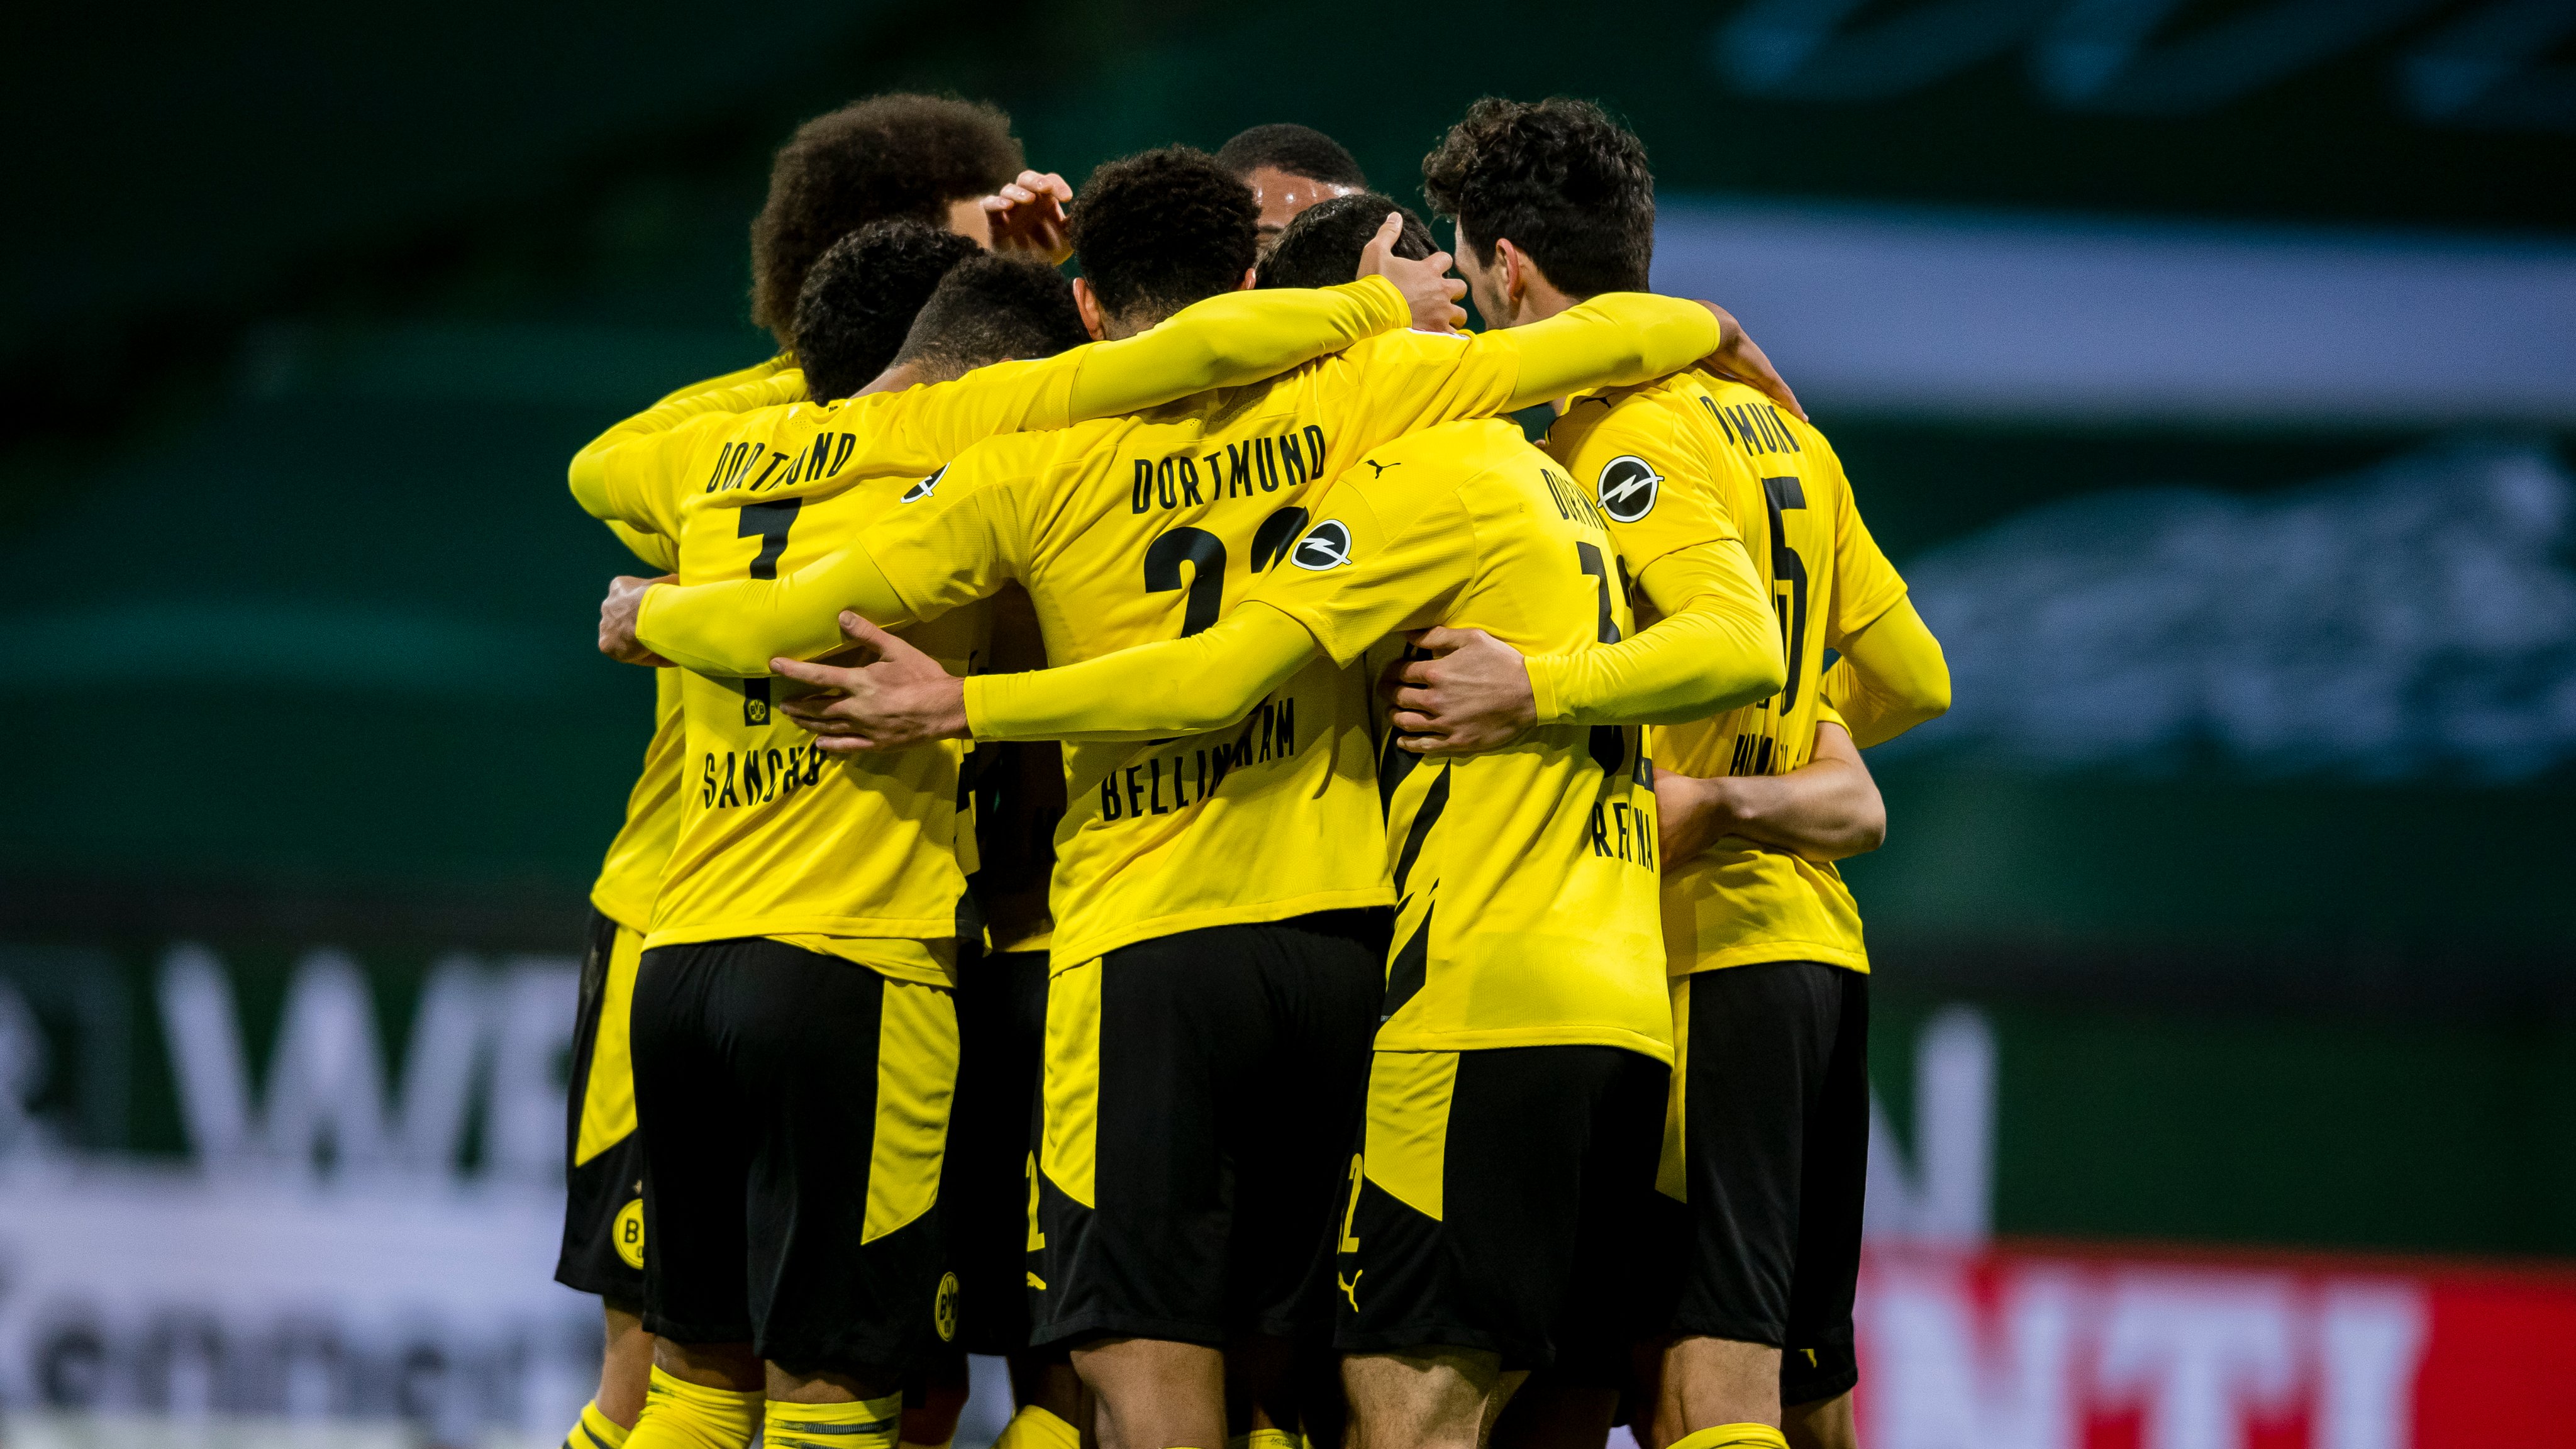 Expect Borussia Dortmund to improve significantly after winter-break, proclaims Michael Zorc